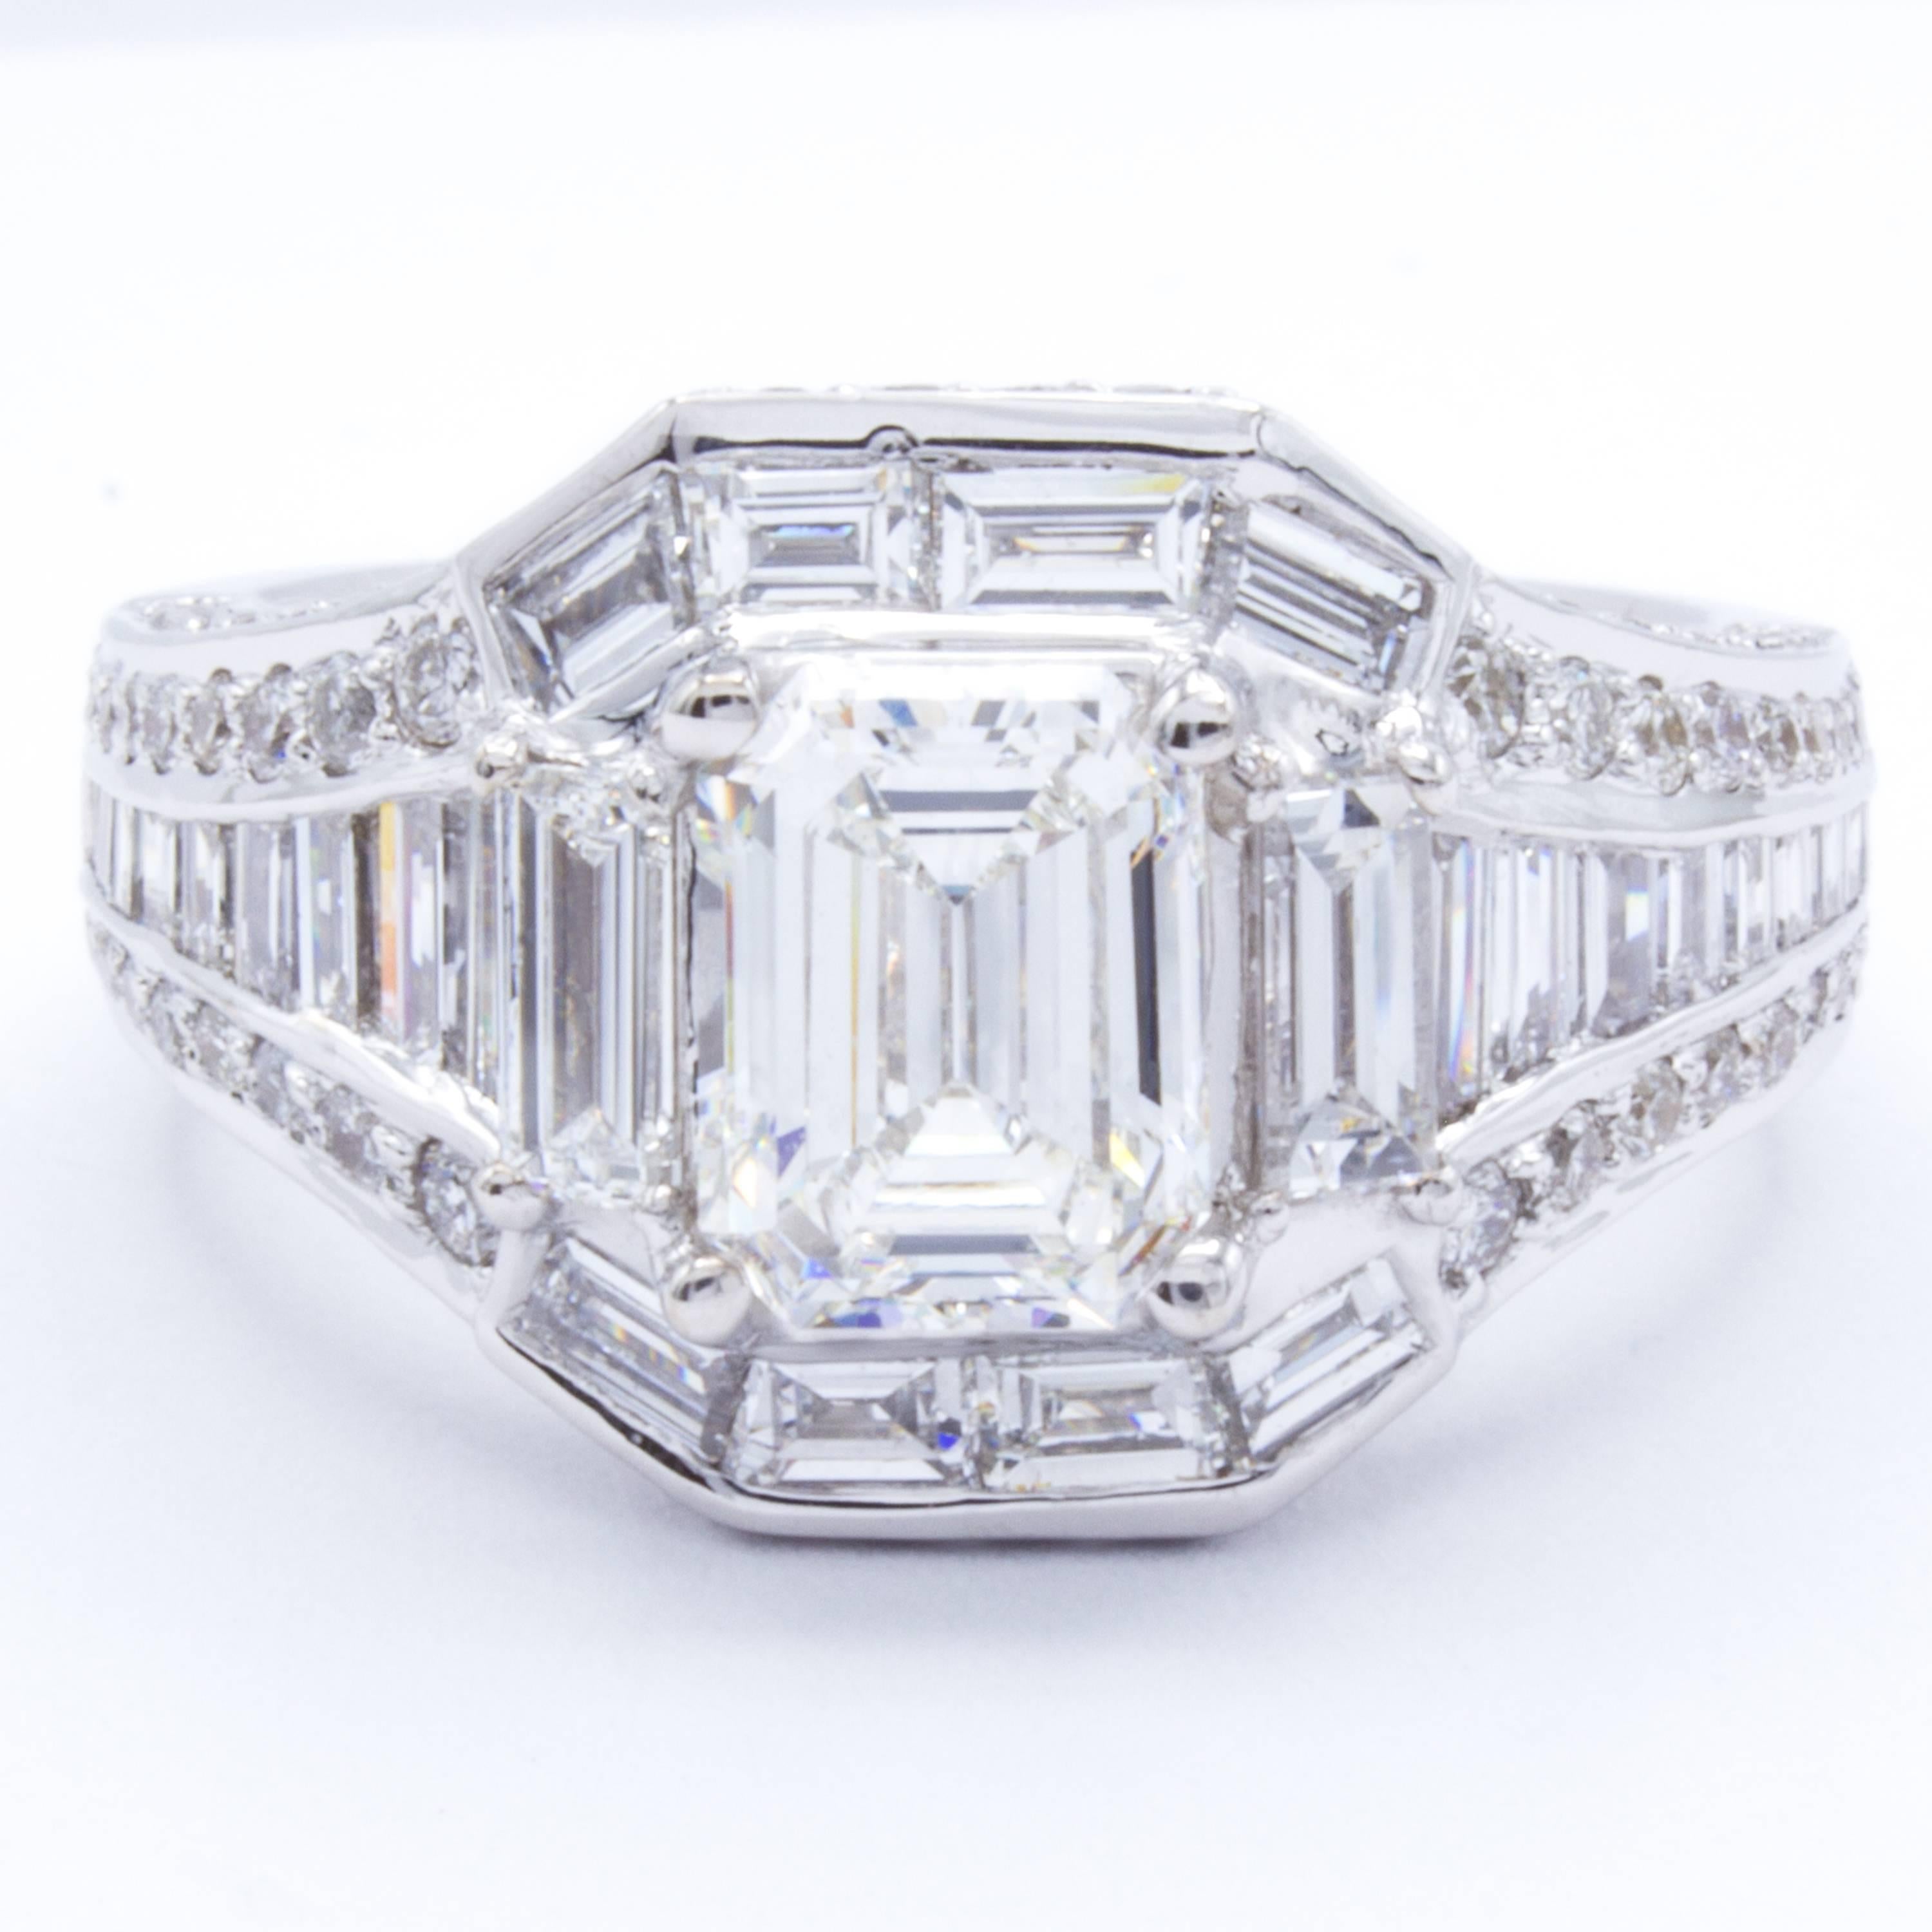 A delightful design by Rosenberg Diamonds & Co. emanates a modern art deco feel with a band of 18Kt white gold supporting a glittering display of round brilliant and baguette diamonds. At the center, an attractive GIA certified 1.08 carat emerald